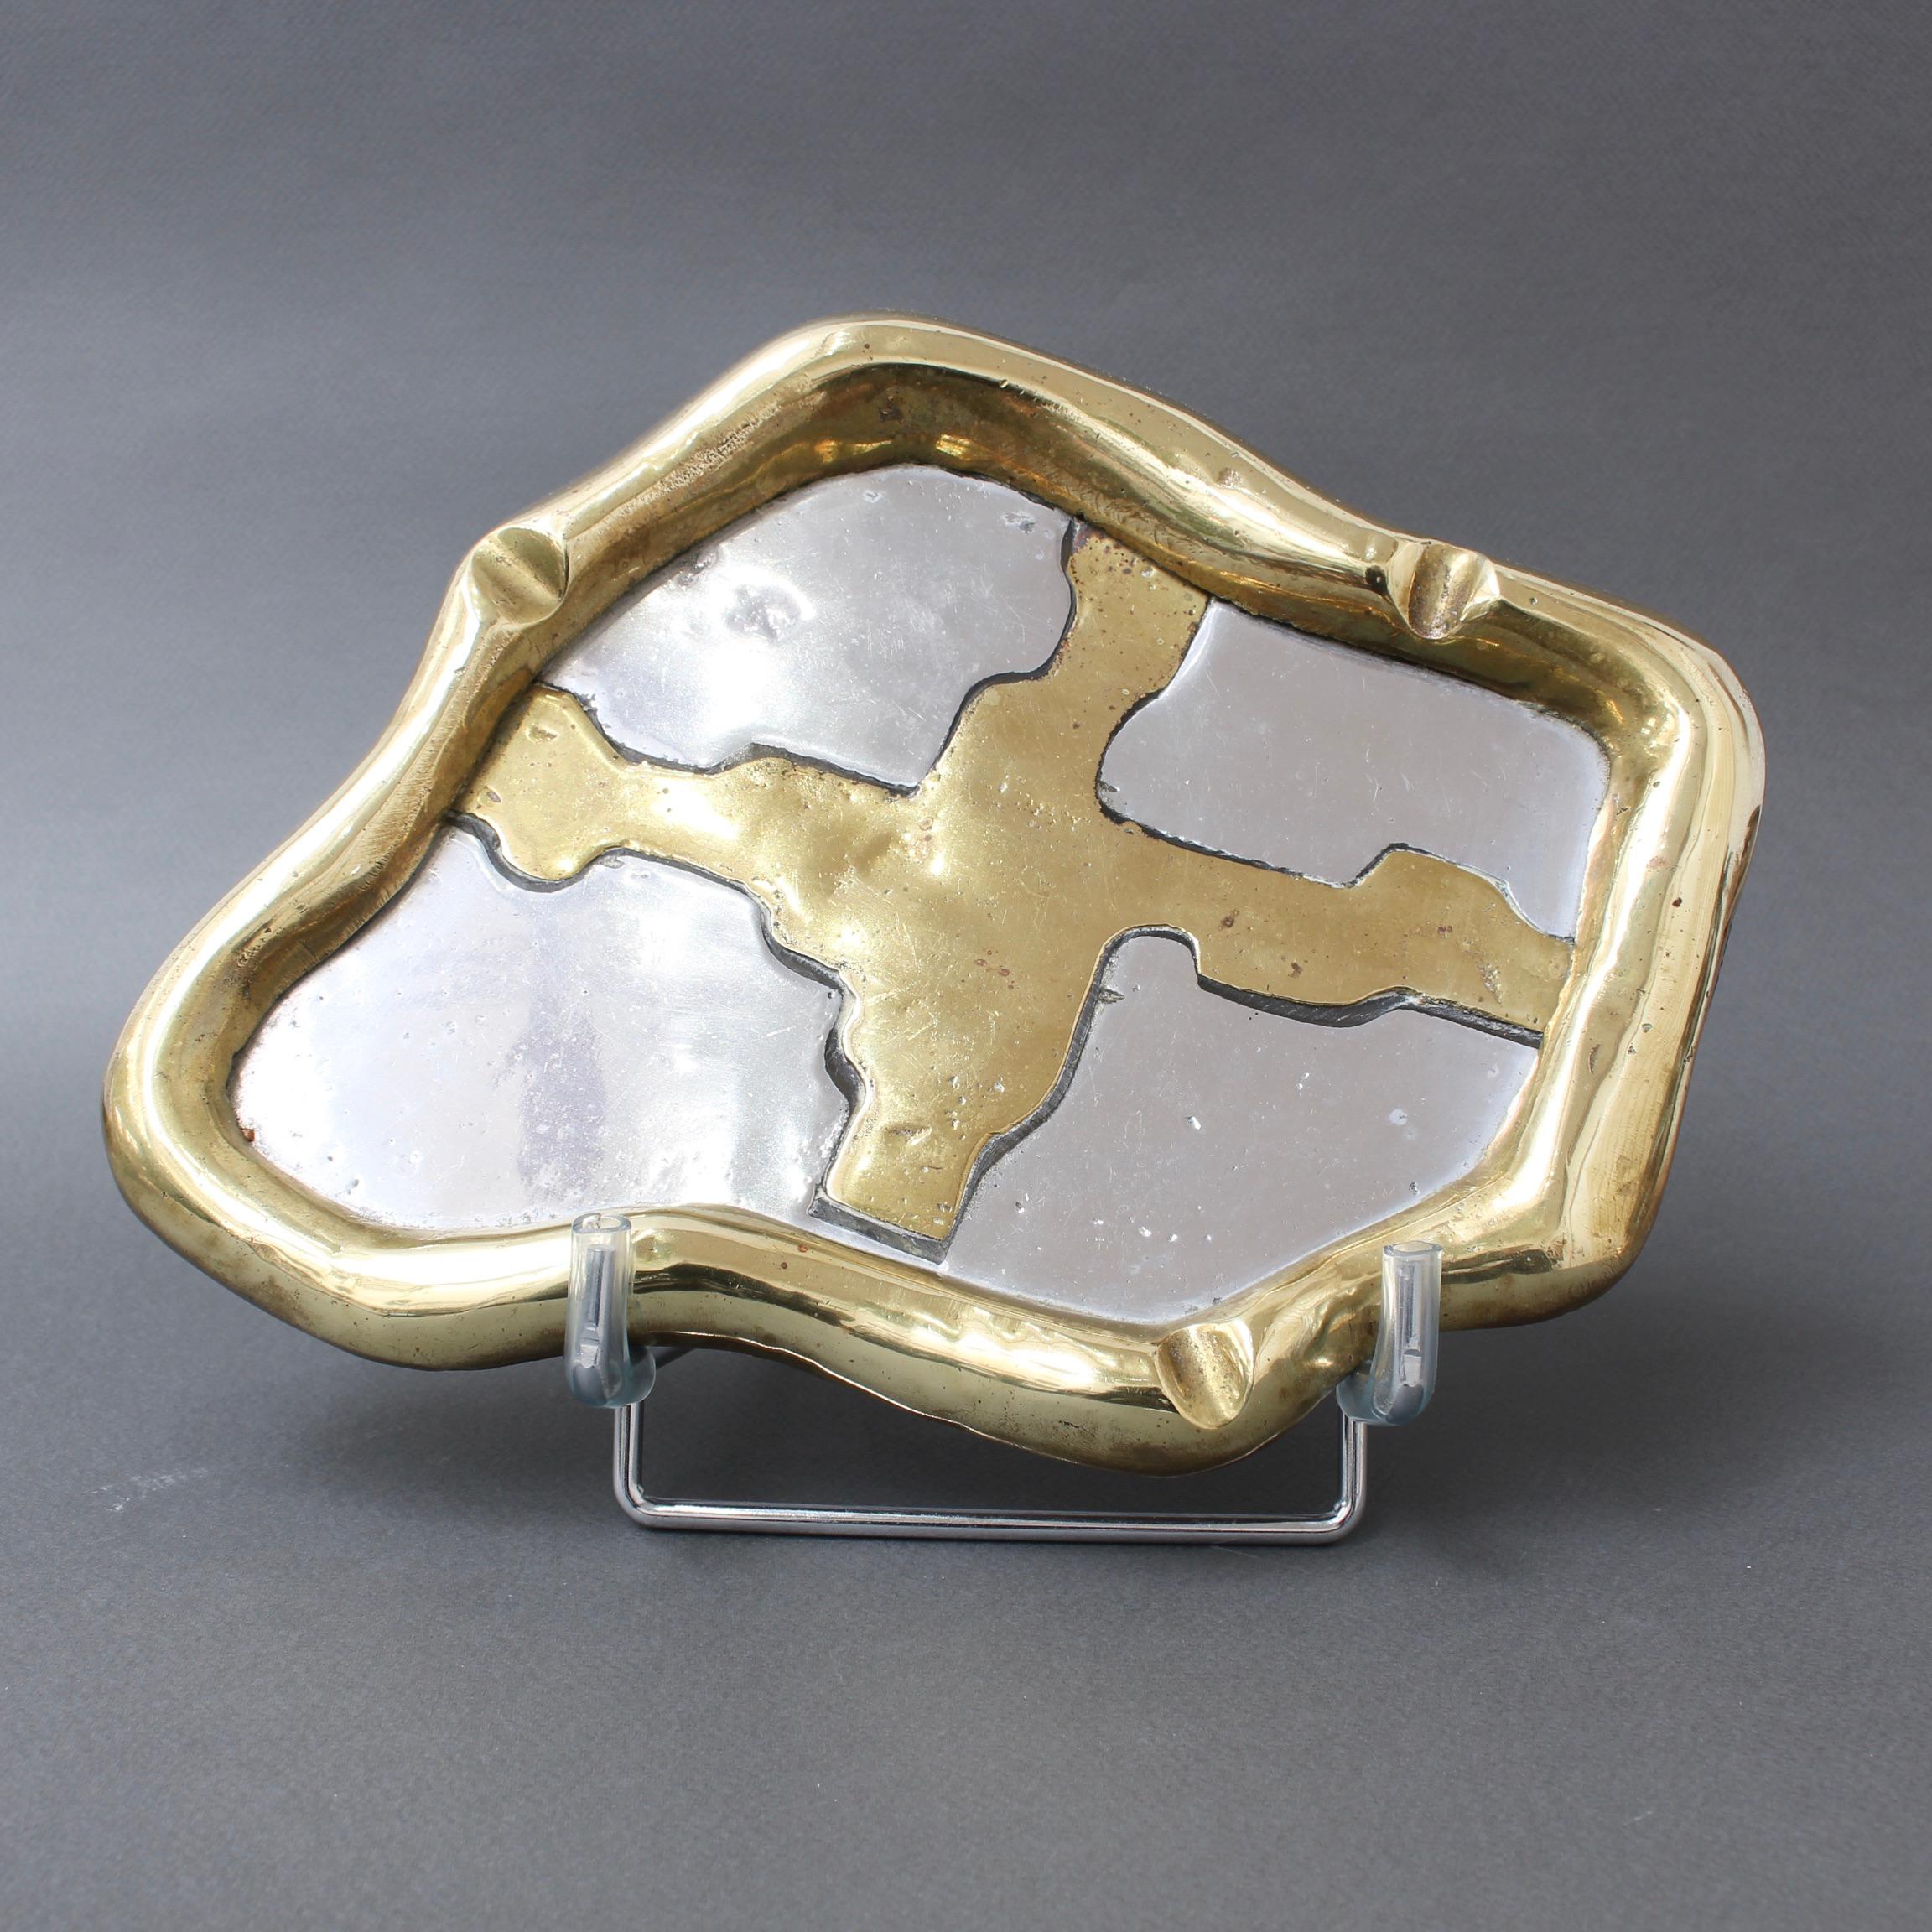 Aluminium and brass vide-poche / ashtray attributed to David Marshall (circa 1980s). This tray is weighty and tactile. The shiny brass middle and edging is stylishly sensuous with curves. This piece is in good vintage condition with characterful